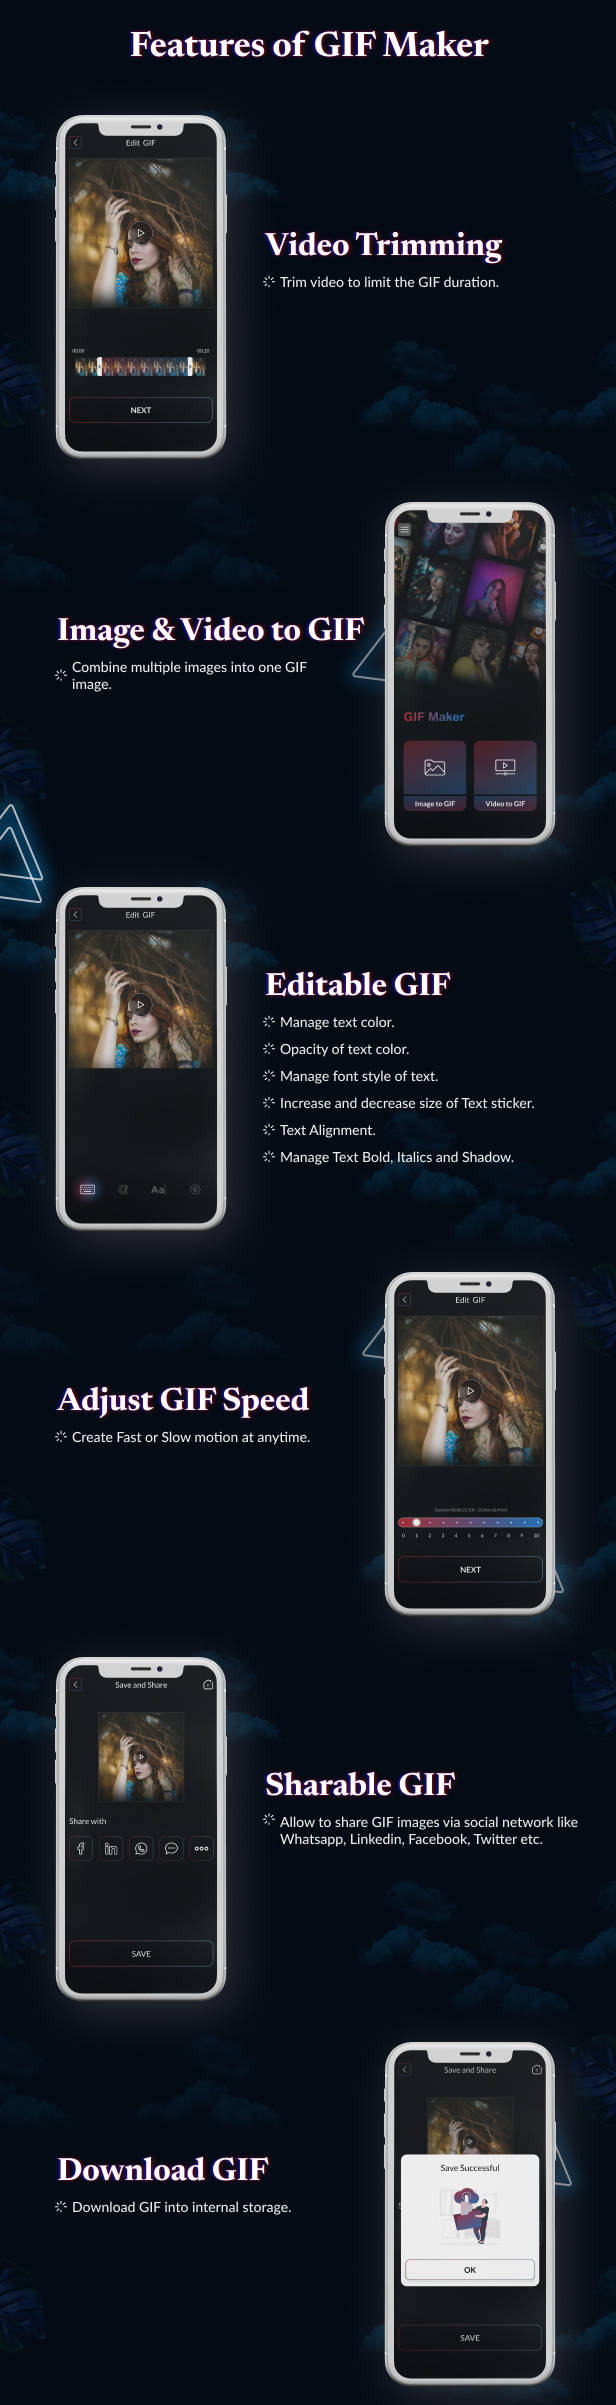 GIF Maker App Features